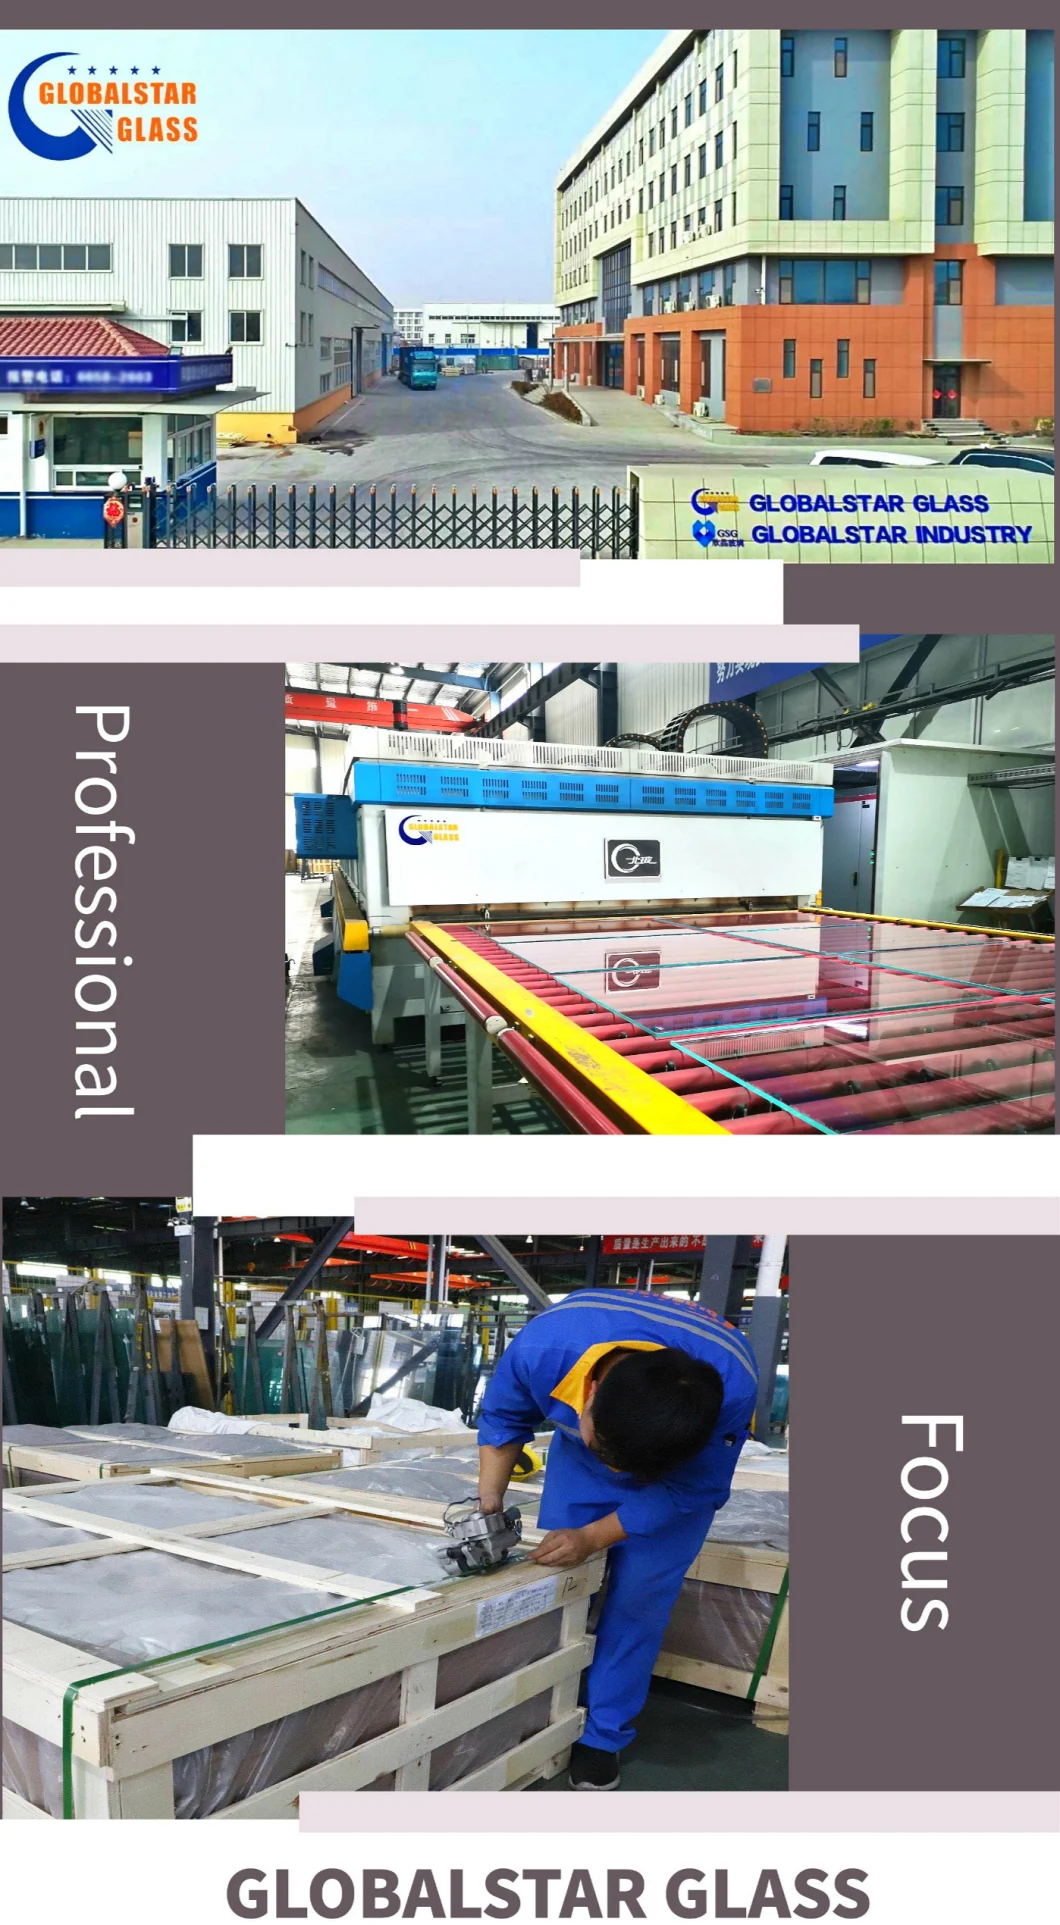 6.38-12.38mm Clear Laminated Glass/ Colored Lamianted Glass/ Tinted Glass/ Float Glass/ PVB Laminated Glass/ Sgp Laminated Glass/ Tempered Glass/ Window Glass